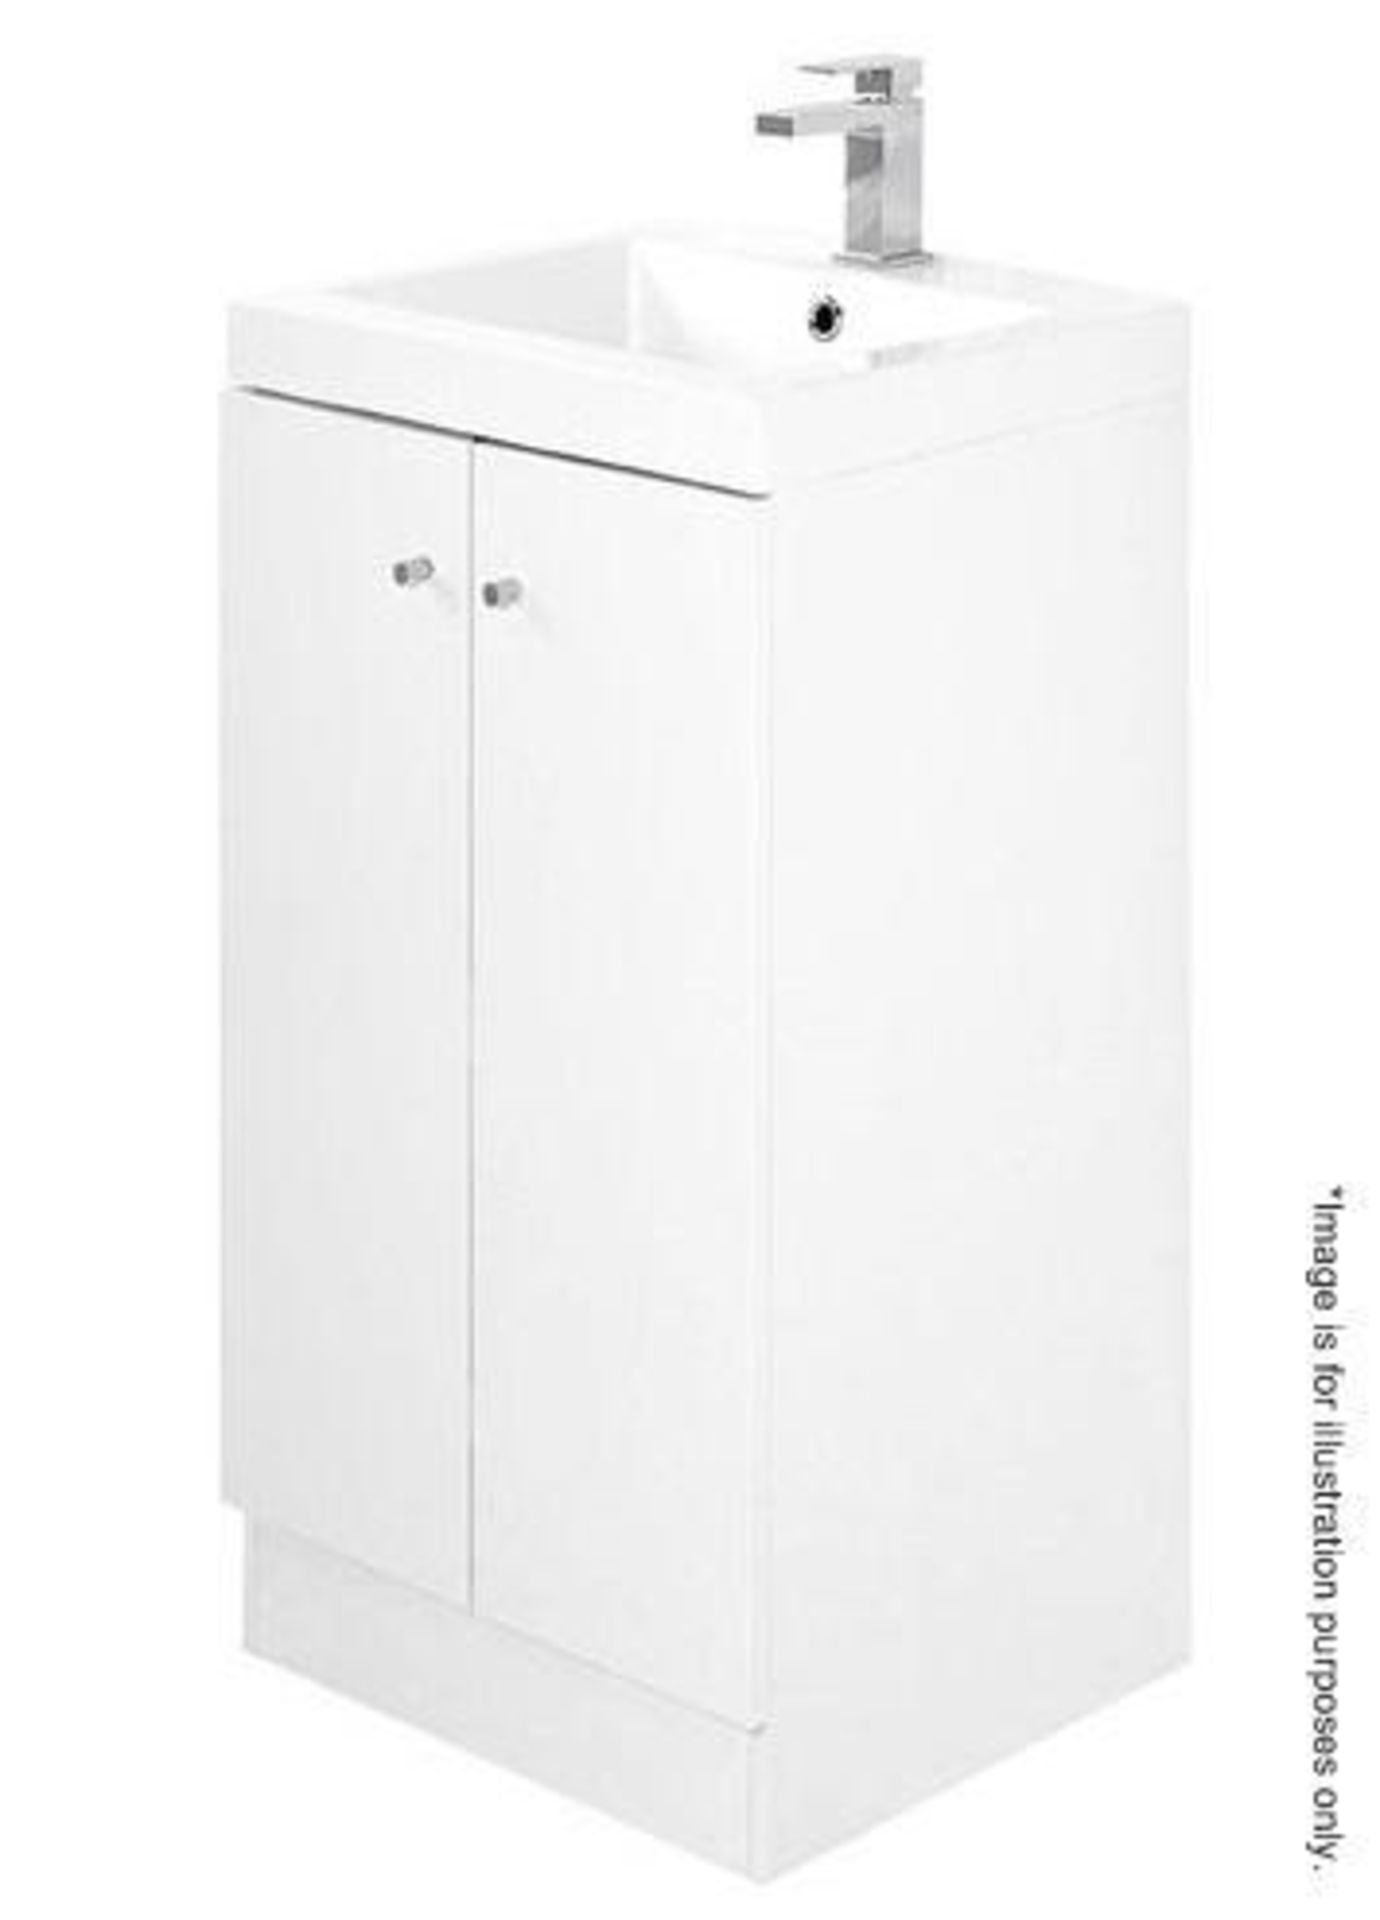 10 x Alpine Duo 400 Floorstanding Vanity Units In Gloss White - Brand New Boxed Stock - Dimensions: - Image 3 of 3